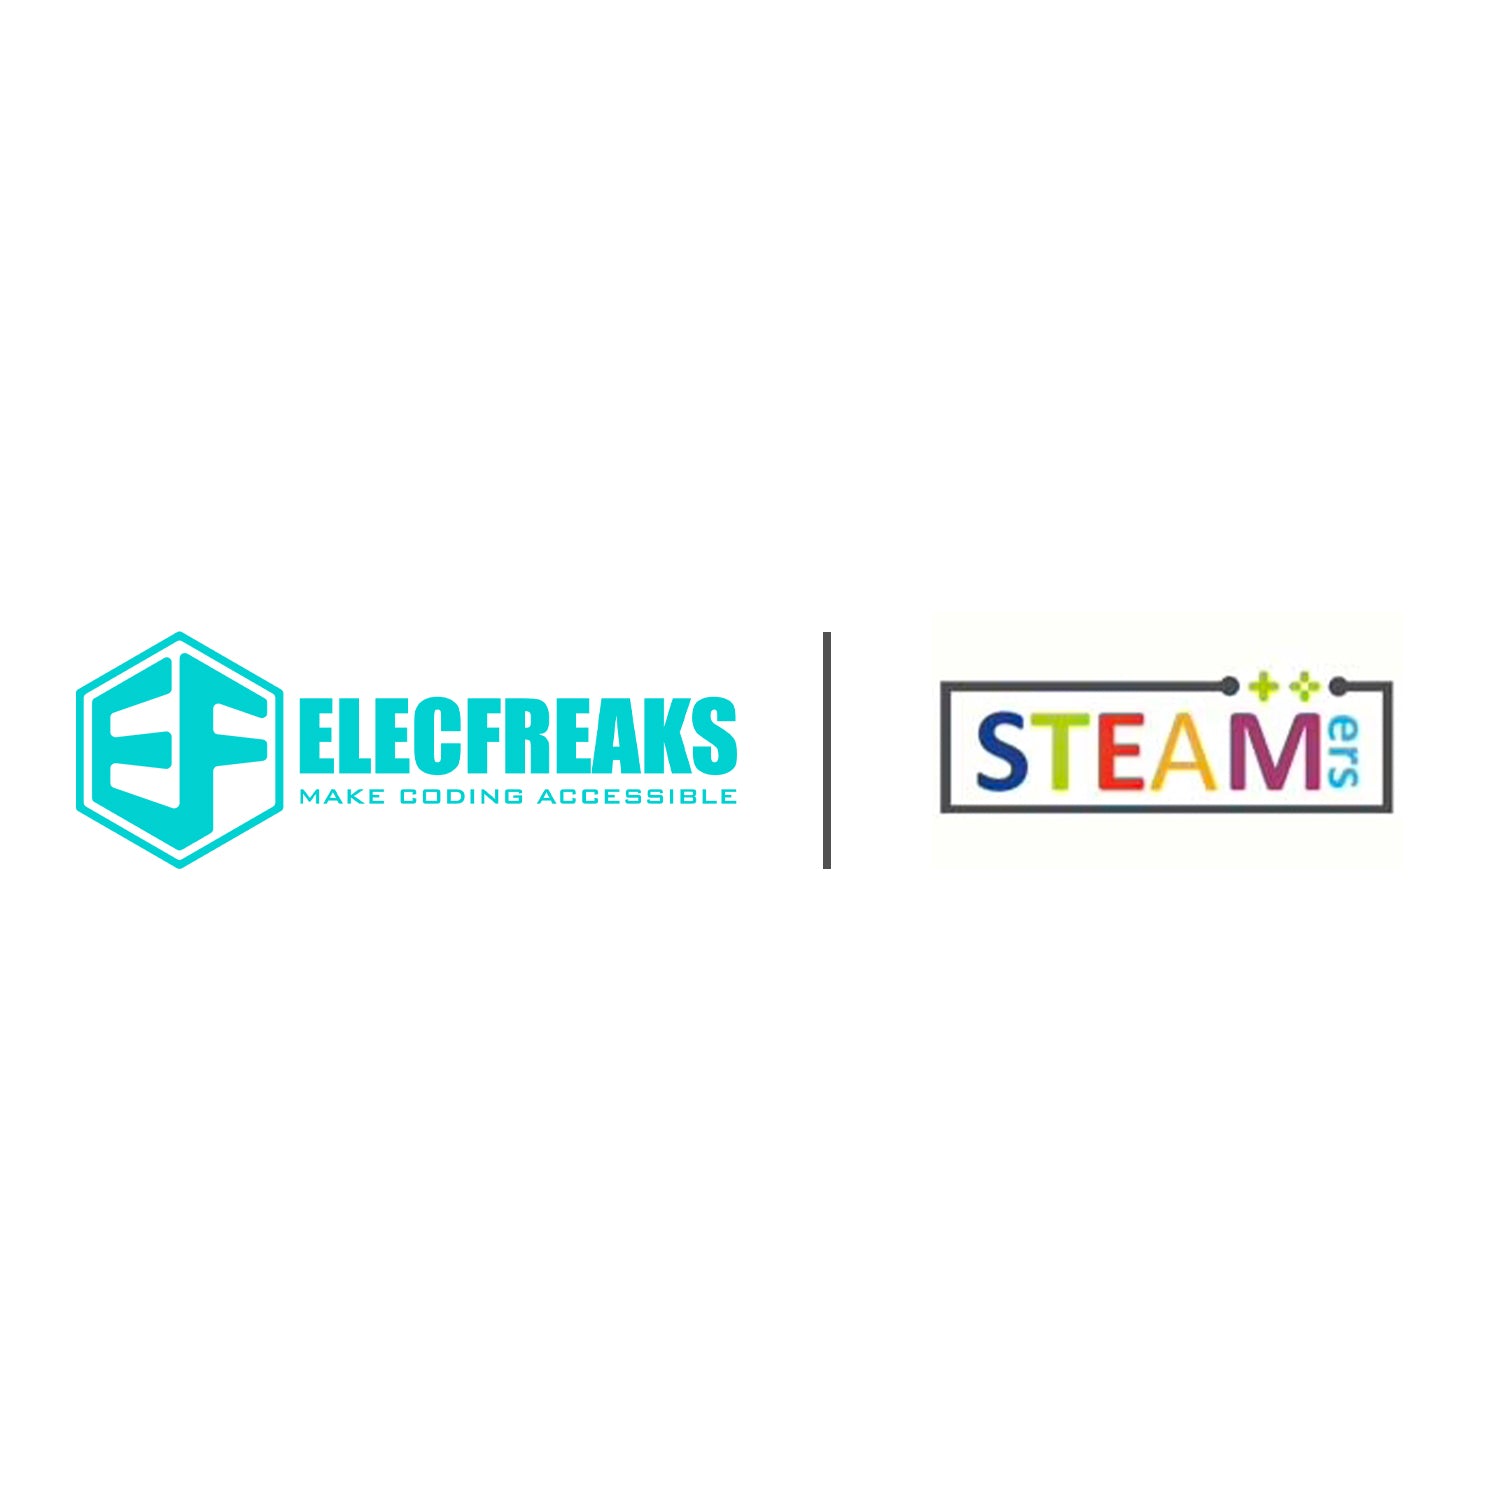 OUR NEW DISTRIBUTOR -- STEAMers